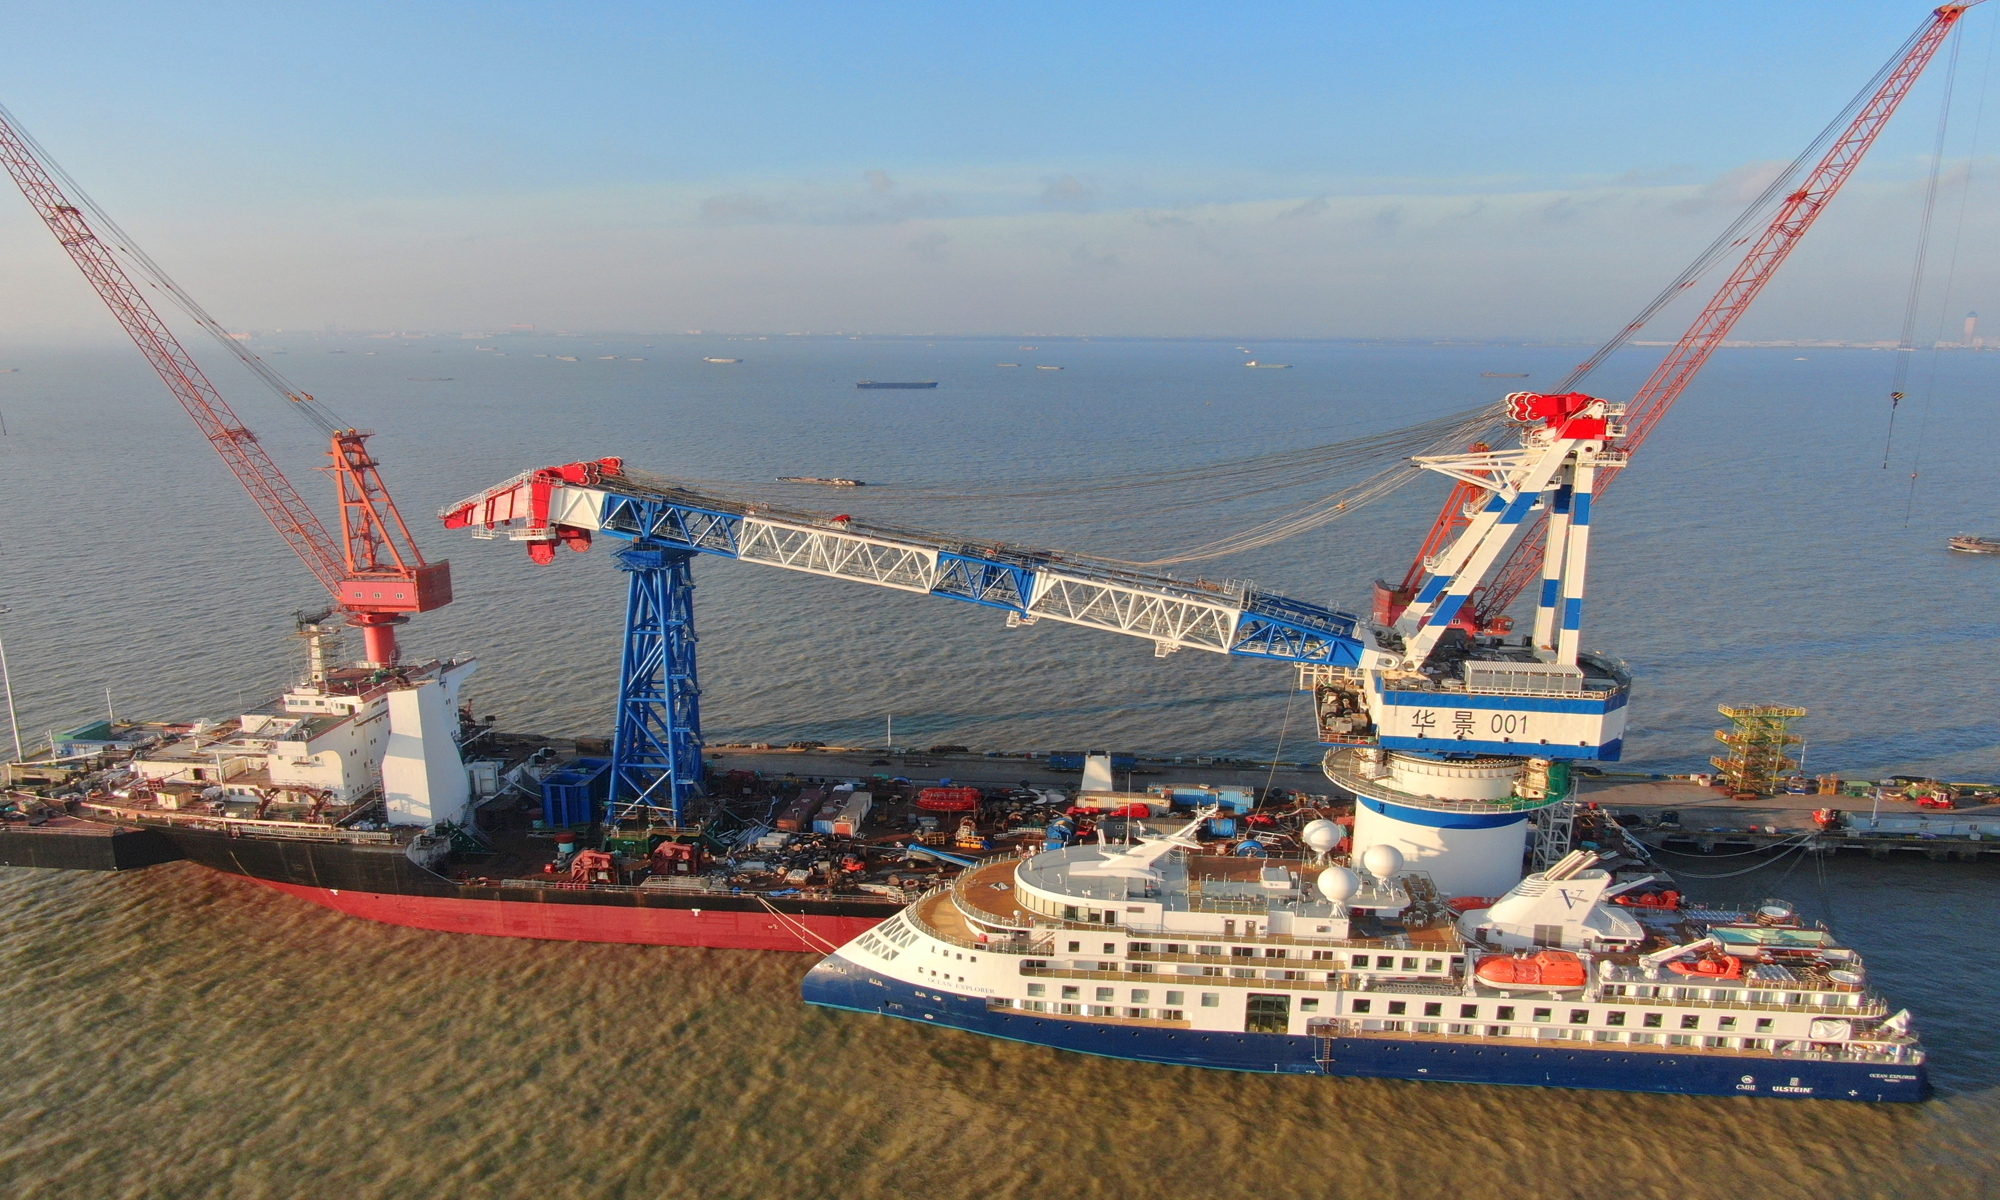 A China-made polar exploration cruise ship is set sail to the UK from a shipyard in Haimen, East China's Jiangsu Province on Monday. The ship will operate cruises to the polar region. It has 131 cabins and can carry 254 people. Even in bad sea conditions, its safe return to port capability can reach 1,500 nautical miles (2,778 kilometers). Photo: VCG
